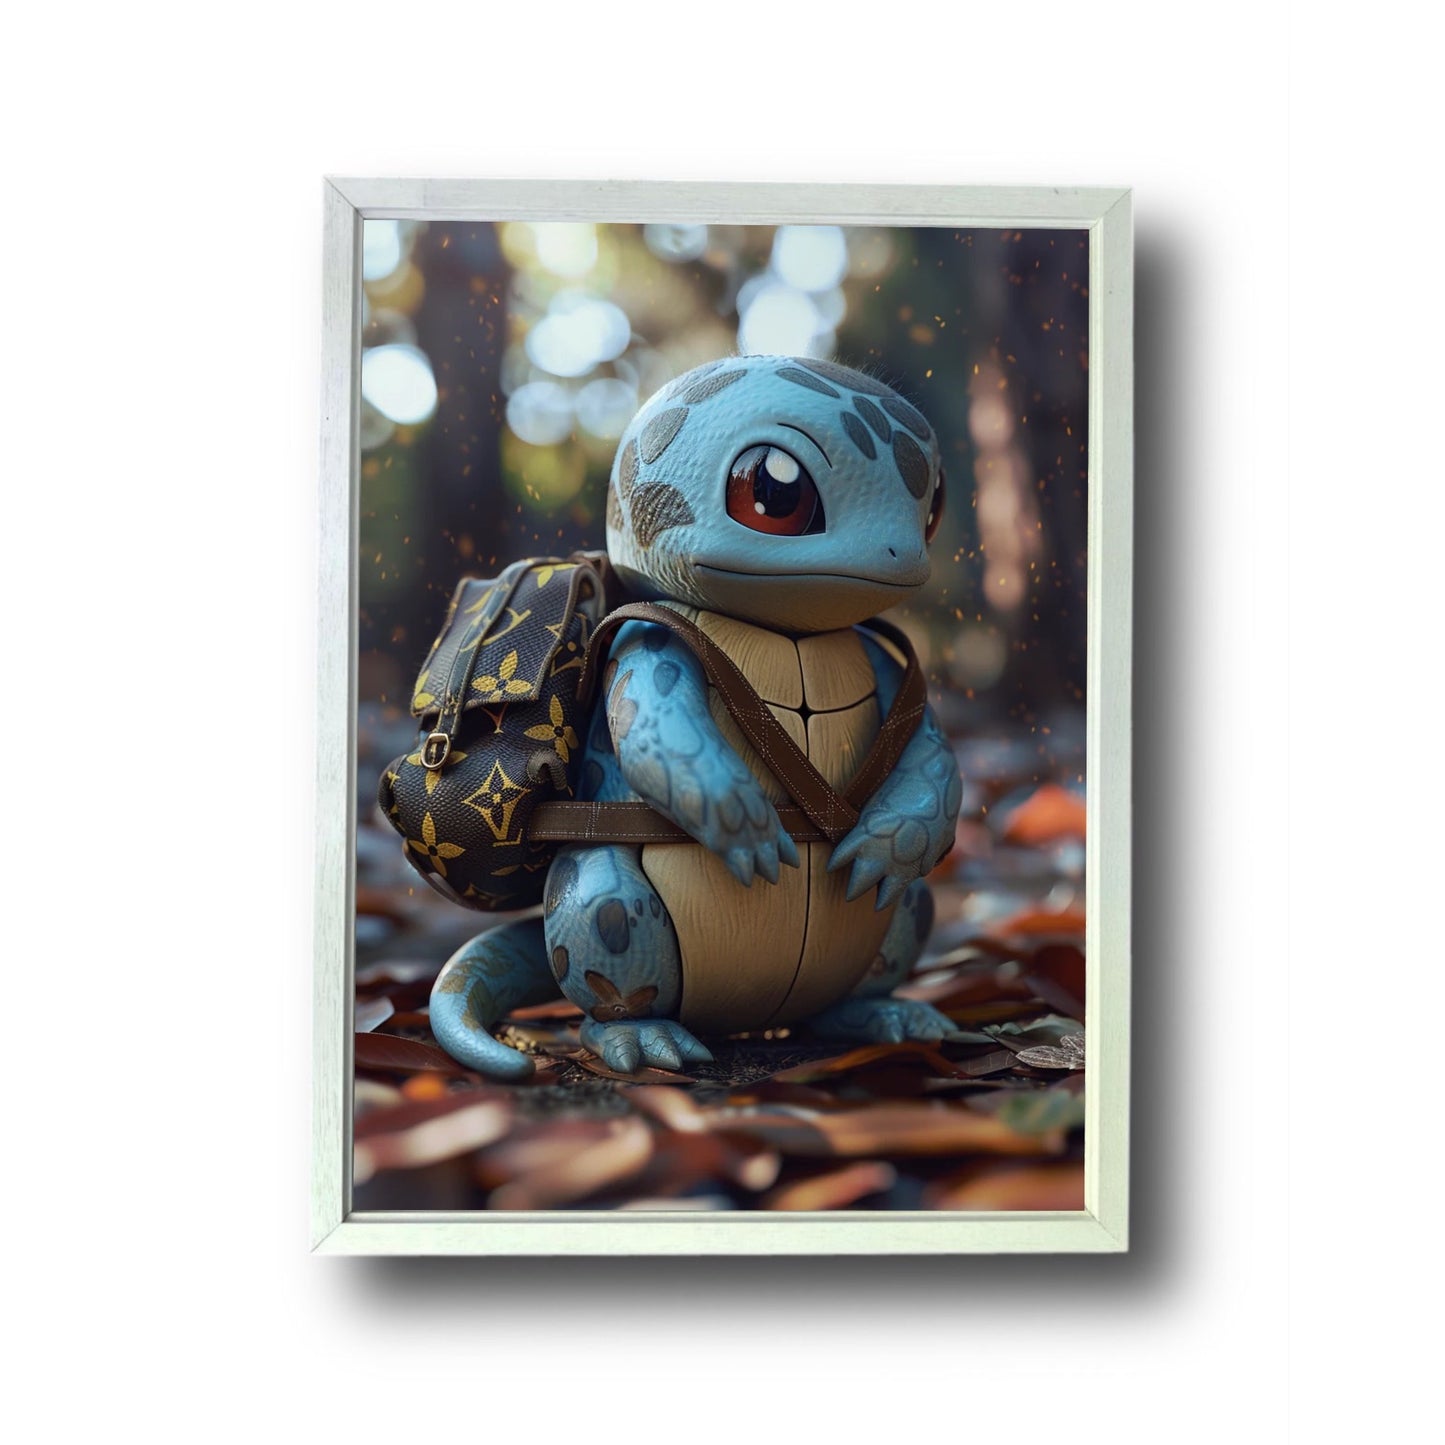 Squirtle in Louise Vuitton 4.0